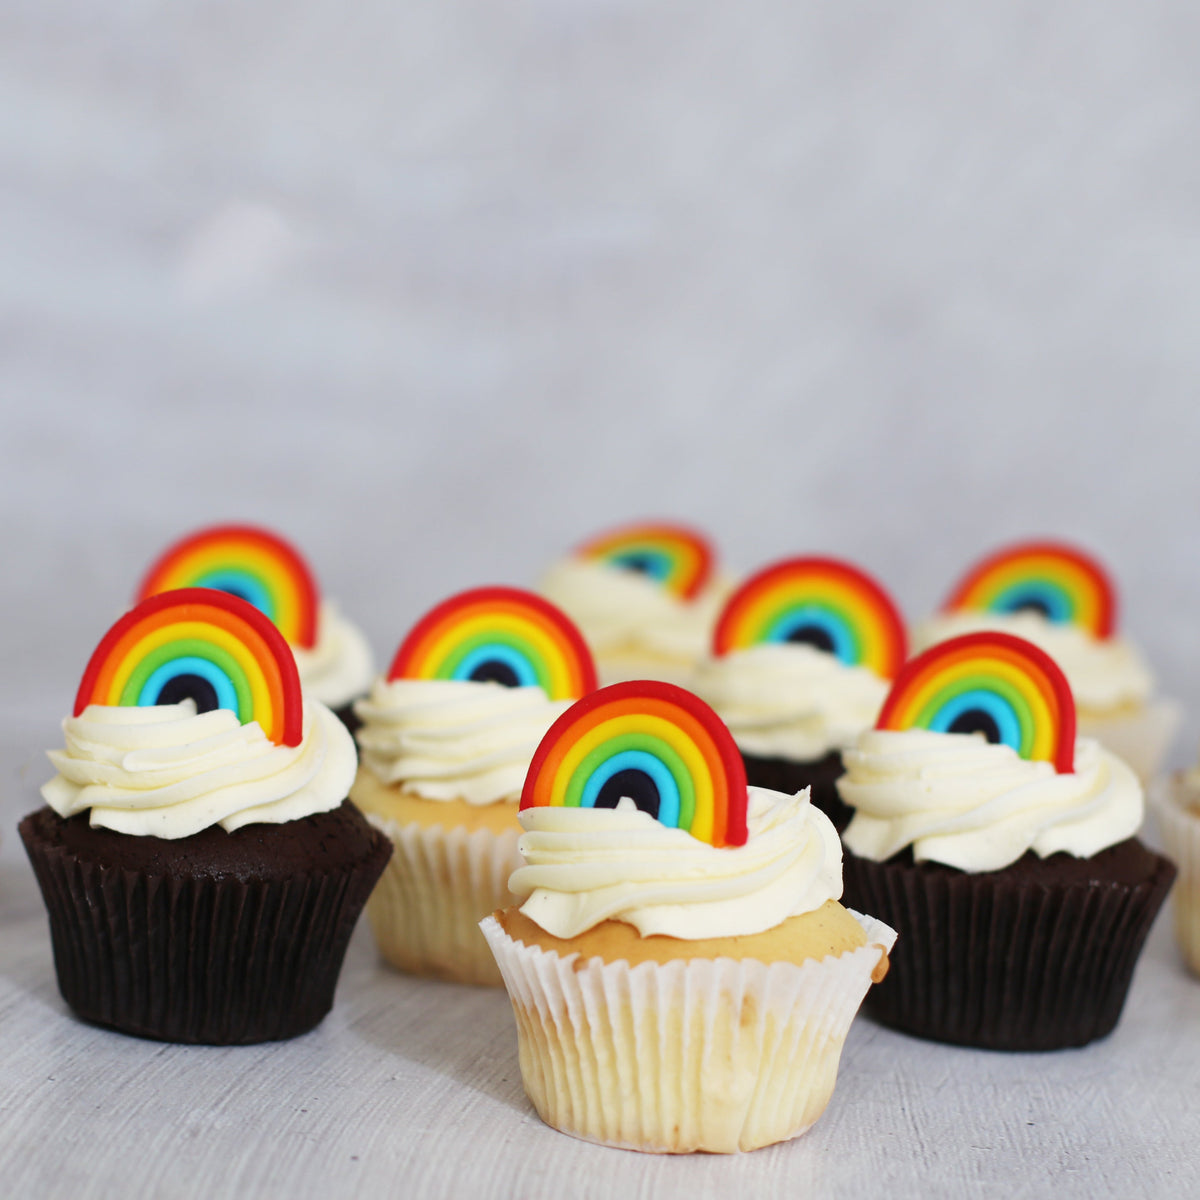 Rainbow Giftbox Cupcakes Pre Selected Boxes The Cupcake Queens 